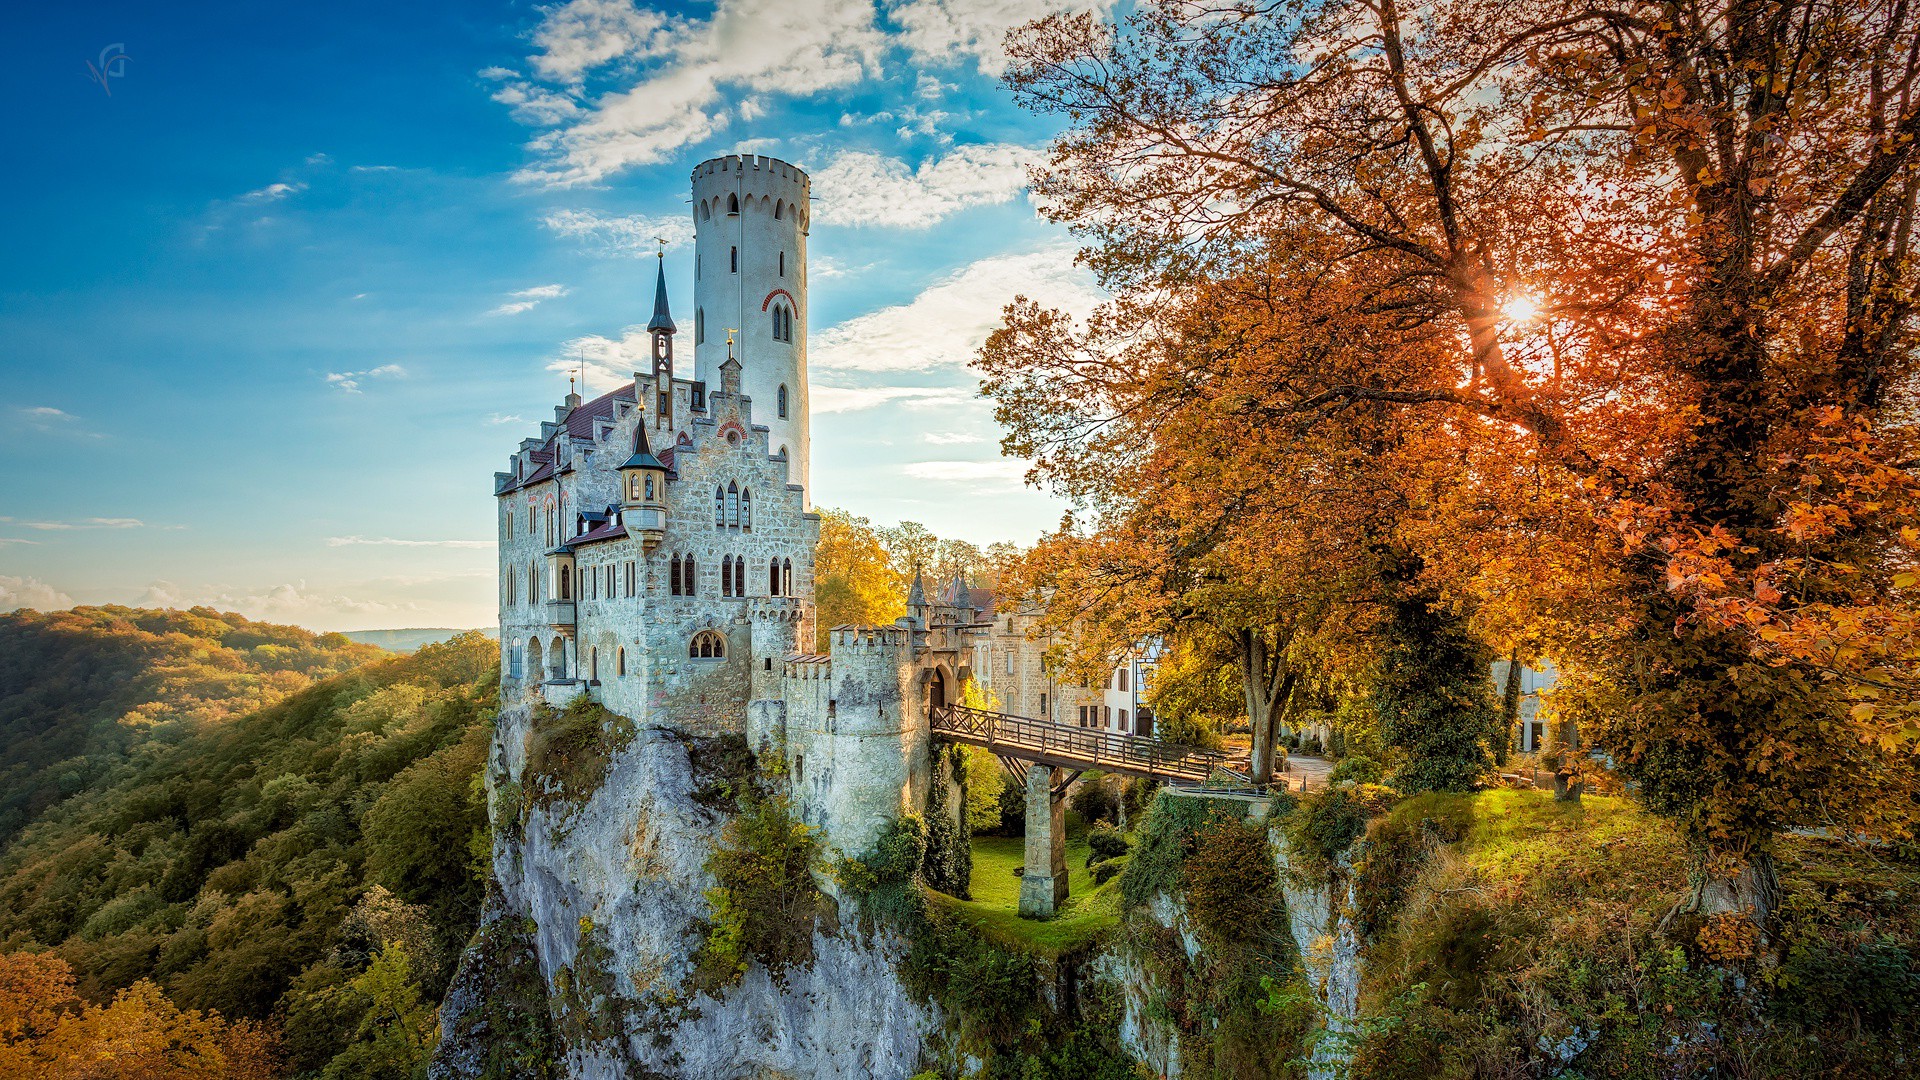 landscape, HDR, Nature, Cliff, Fall, Trees, Sunlight, Castle, Architecture, Building, Old Building, Tower, Bridge, Forest, Germany Wallpaper